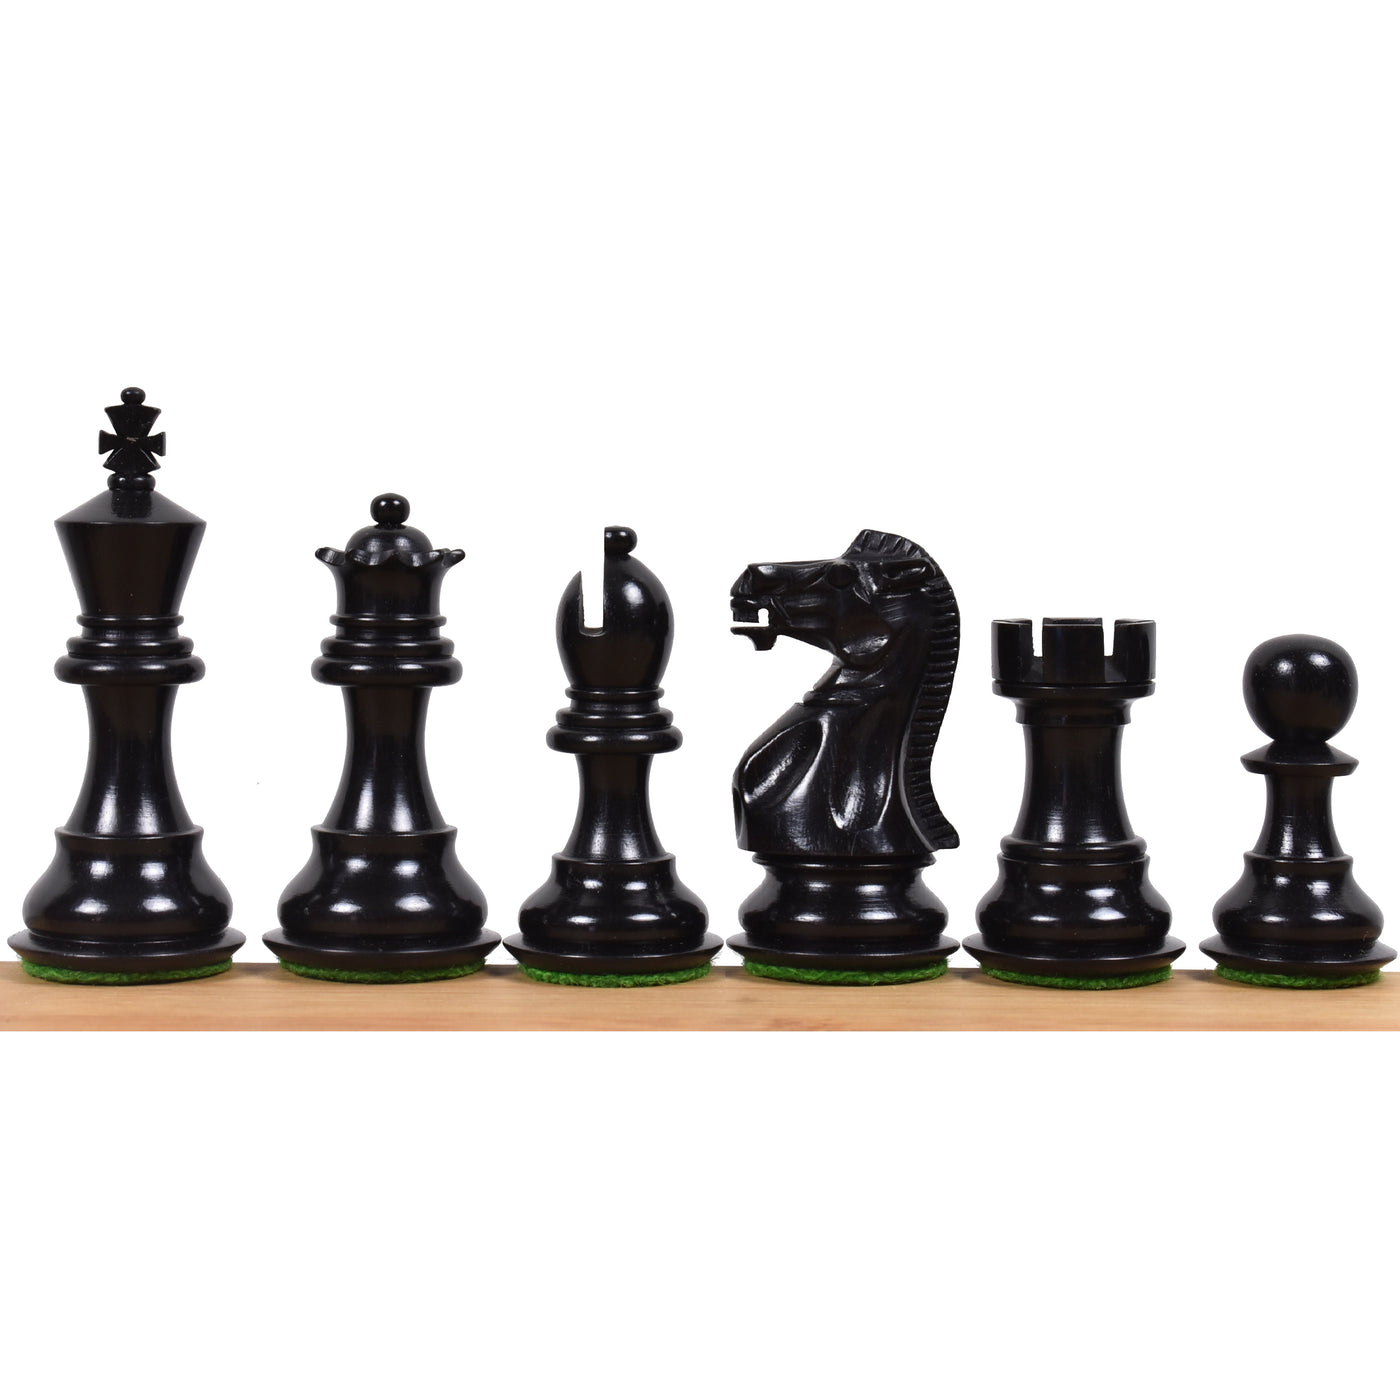 Ebony Wood - 3.1" Pro Staunton Luxury Triple Weighted Chess Pieces with 17" Large Solid Inlaid Board and Golden Rosewood Chess Pieces Storage Box